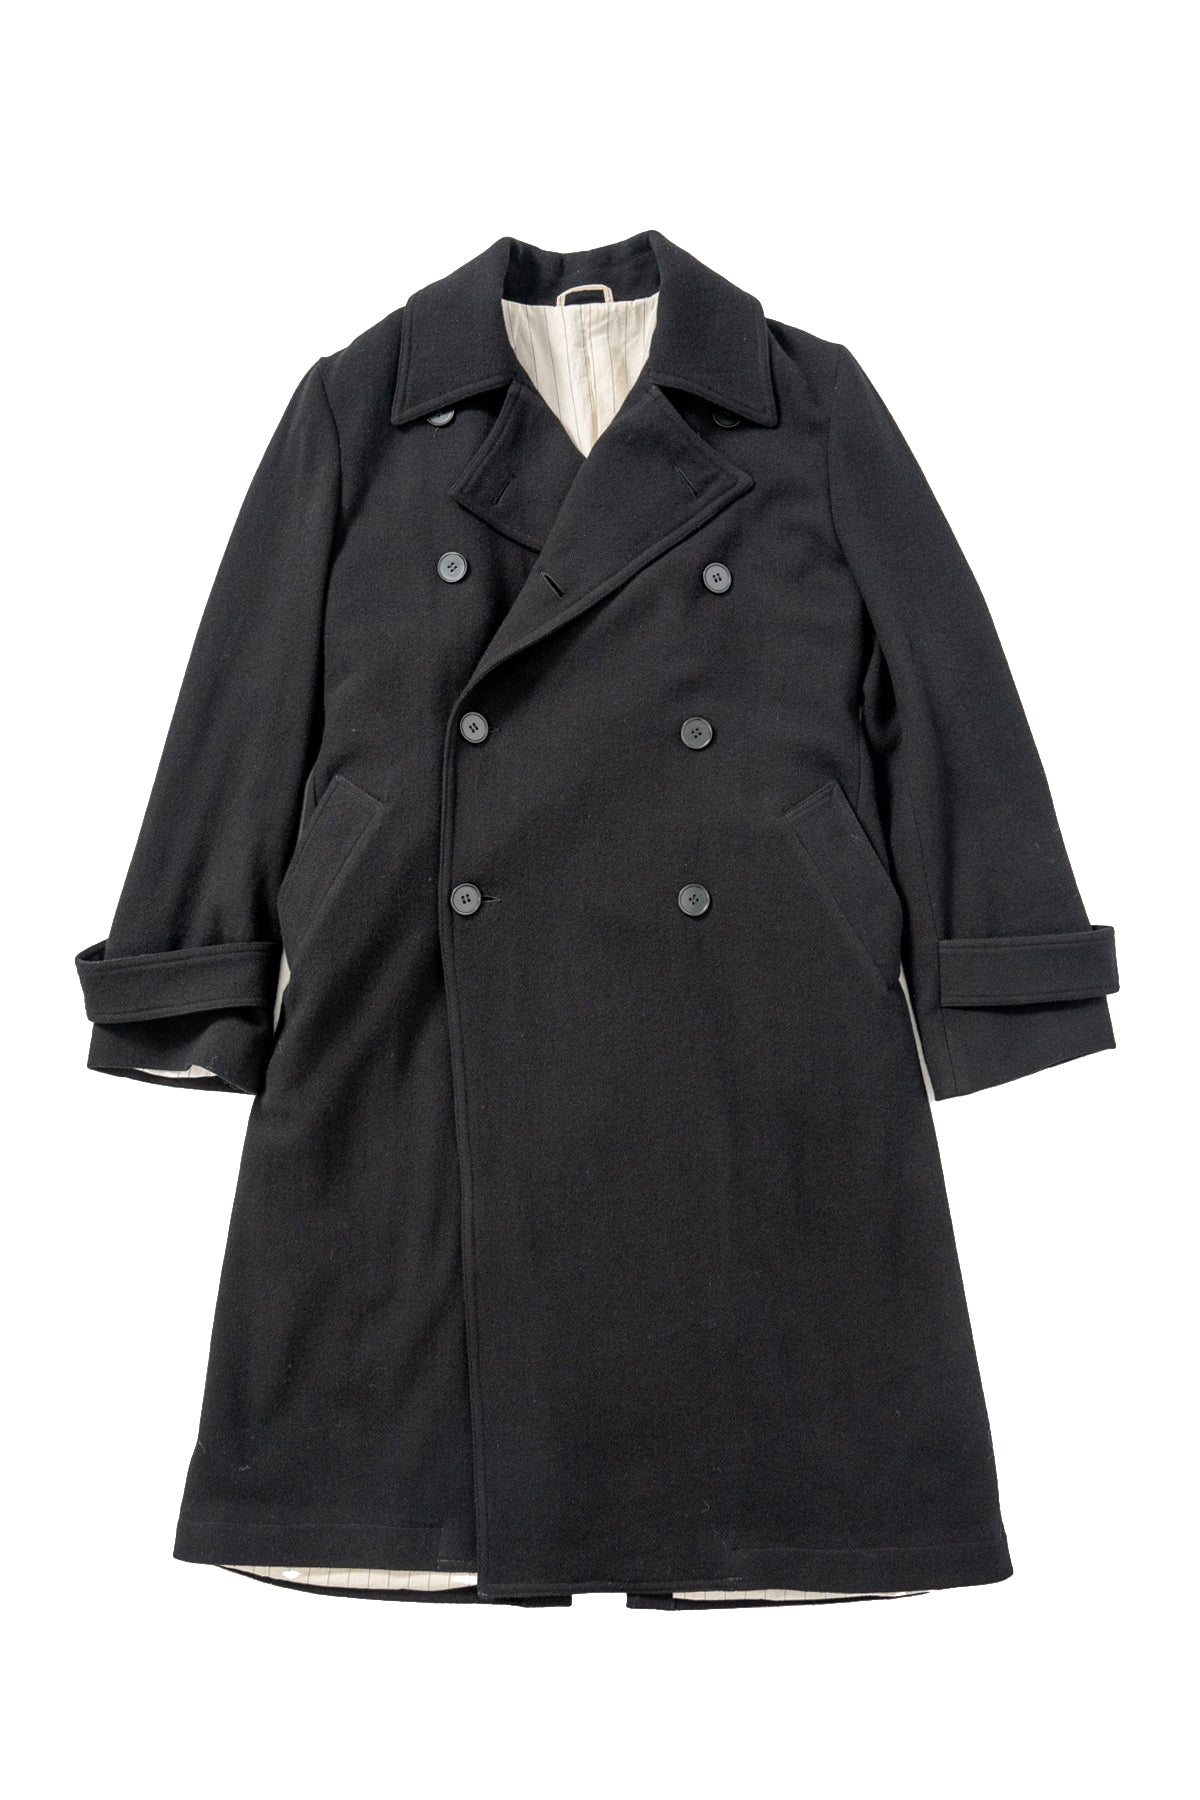 LINED DETACHABLE STRAP TRENCH COAT